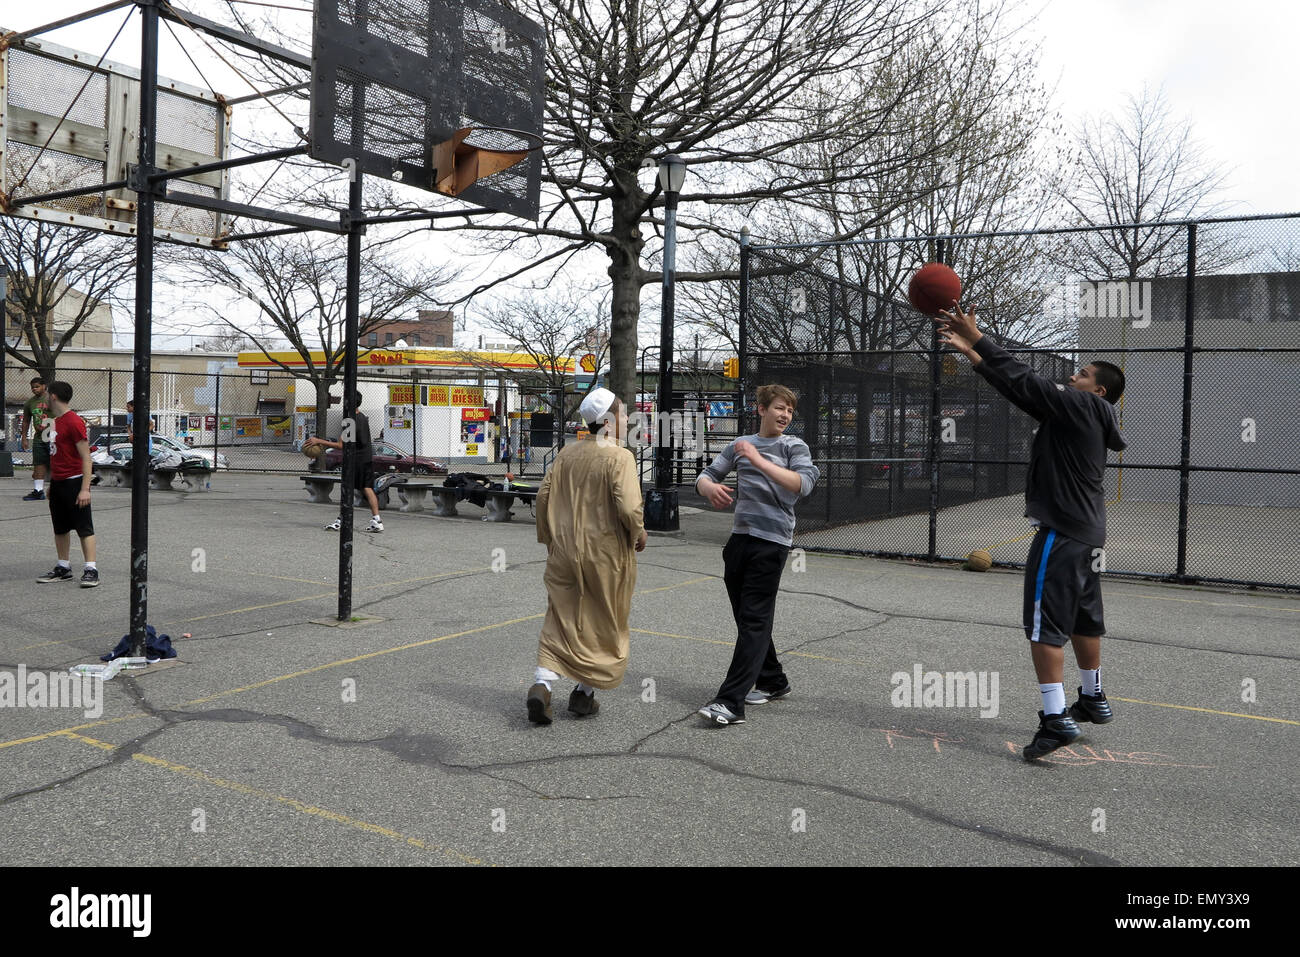 Play Pickup Basketball in New York City with IndoorHoops